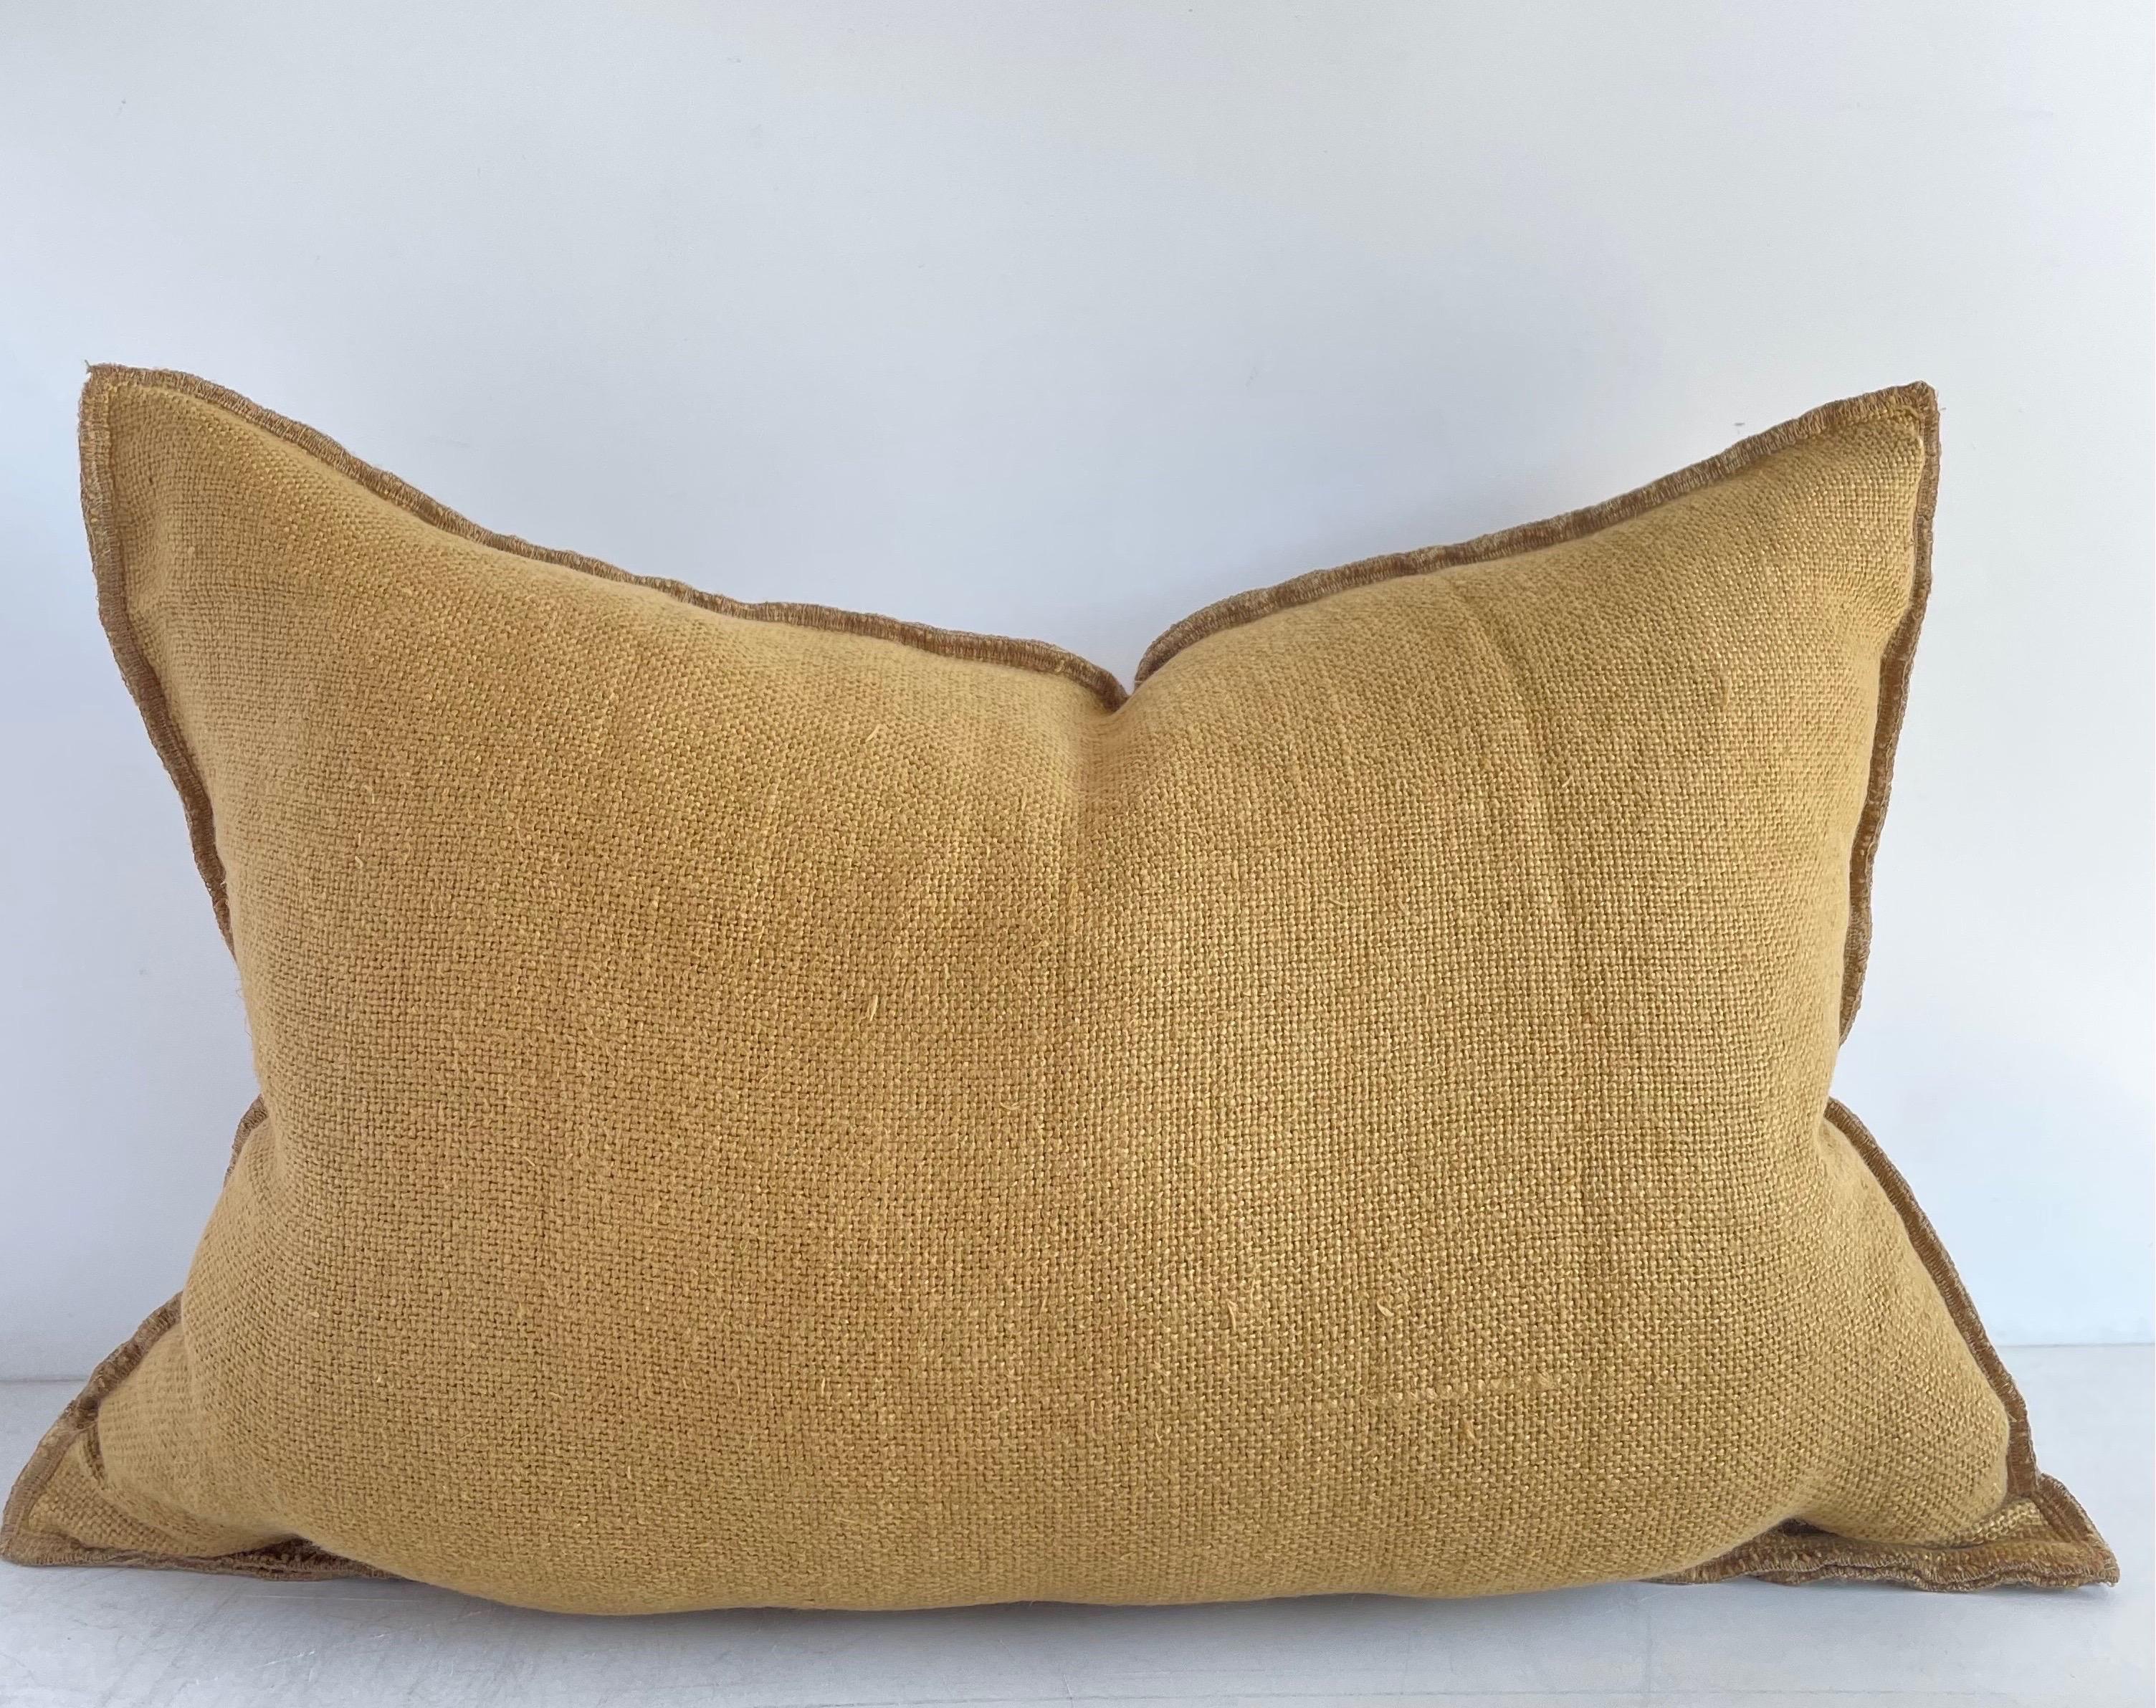 Decorative Accent Pillow in a thick nubby soft linen.
Size: 16” x 24” when stuffed with insert.
Decorative Metal buttons at top, or can be used at the bottom, with a decorative stitched edging.
This does not come with insert. Please request